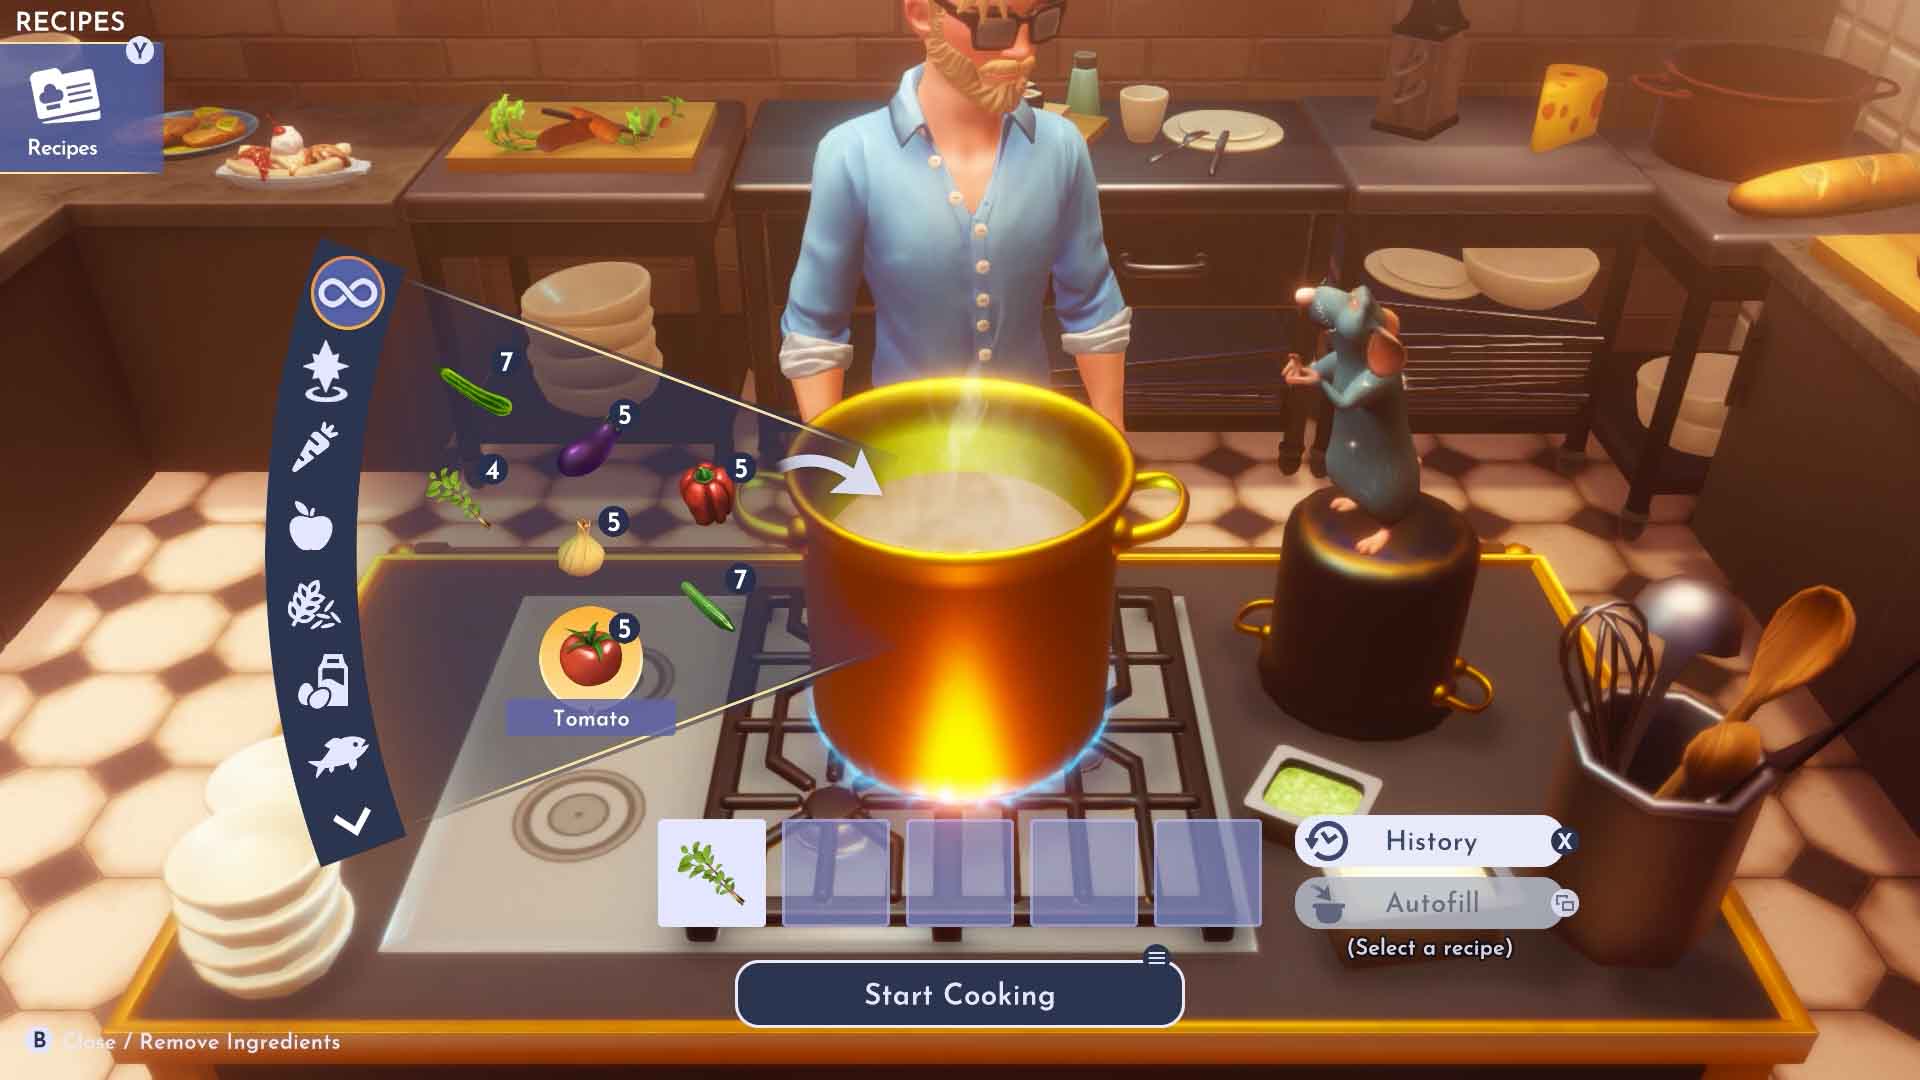 How do I cook, then?